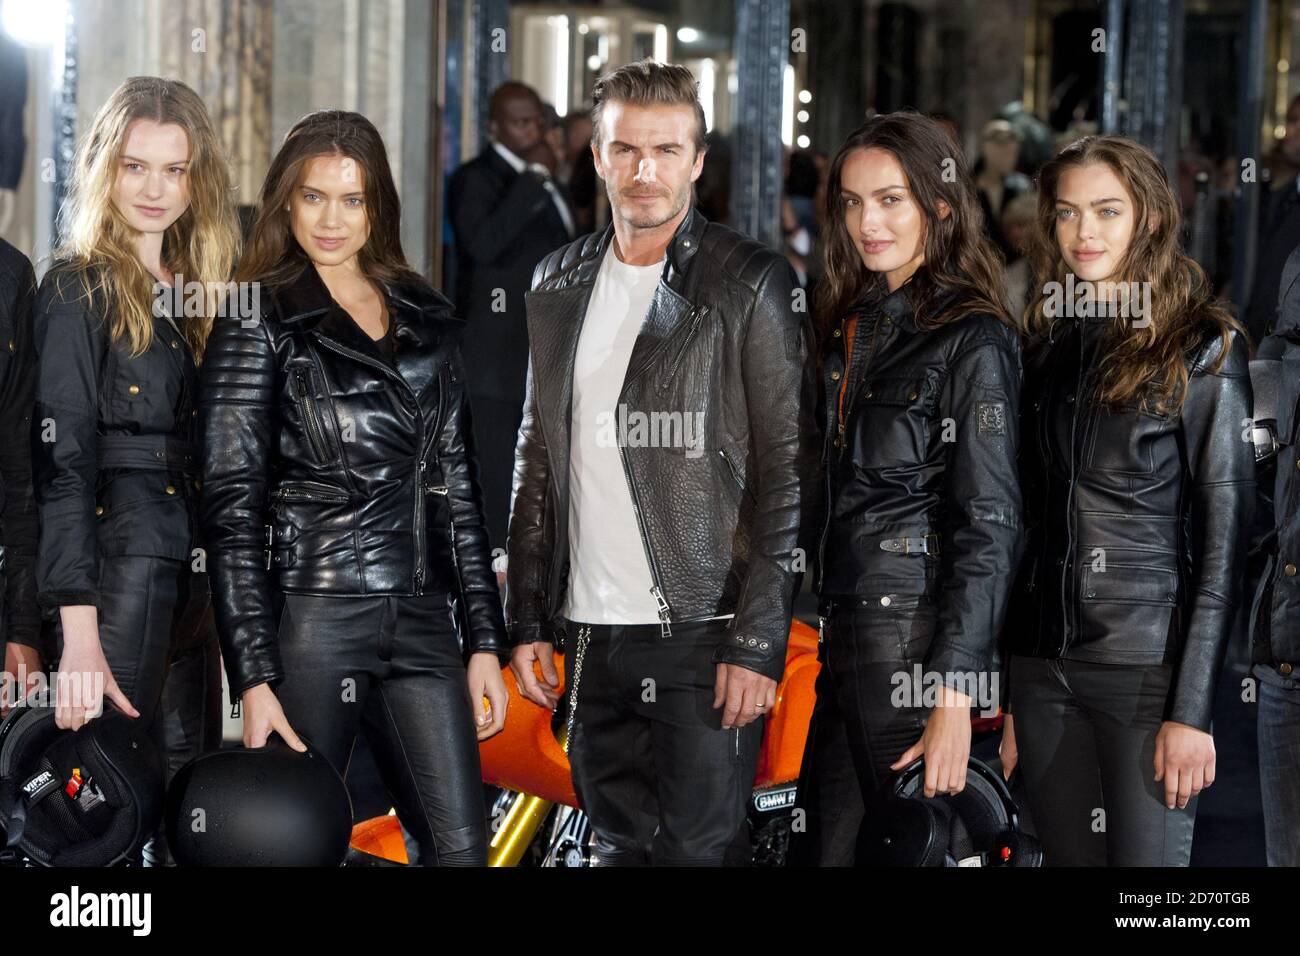 Belstaff Bond Street High Resolution Stock Photography and Images - Alamy